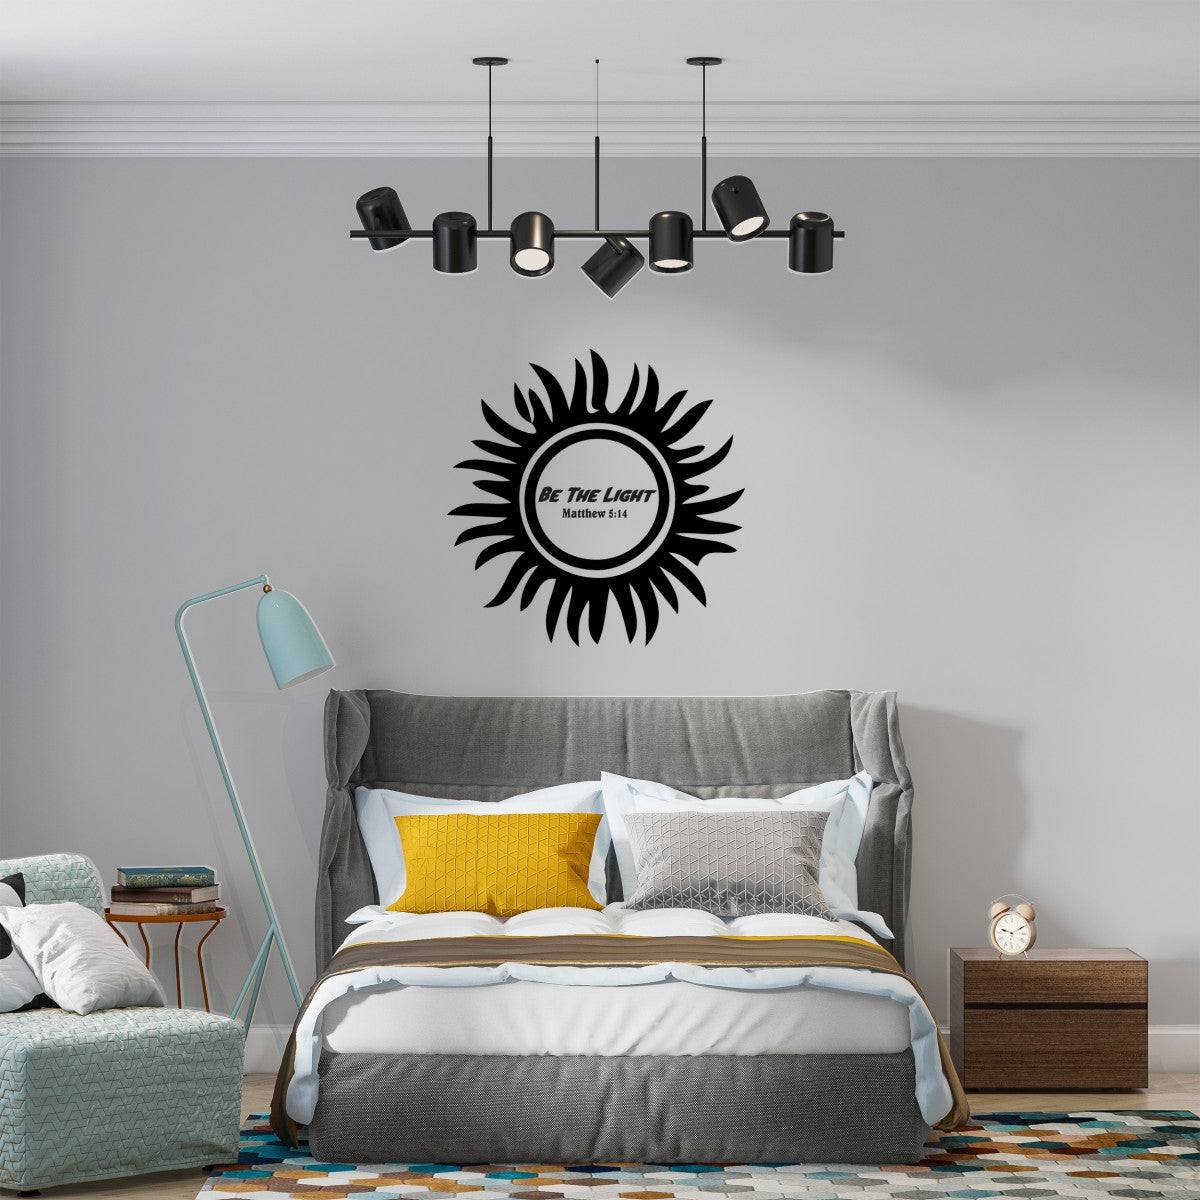 Bible Verse Wall Decals with Sun Drawing - Sun Framed Be the light Sign Bible Wall Stickers - Religious Inspirational Wall Stickers with Sun Painting